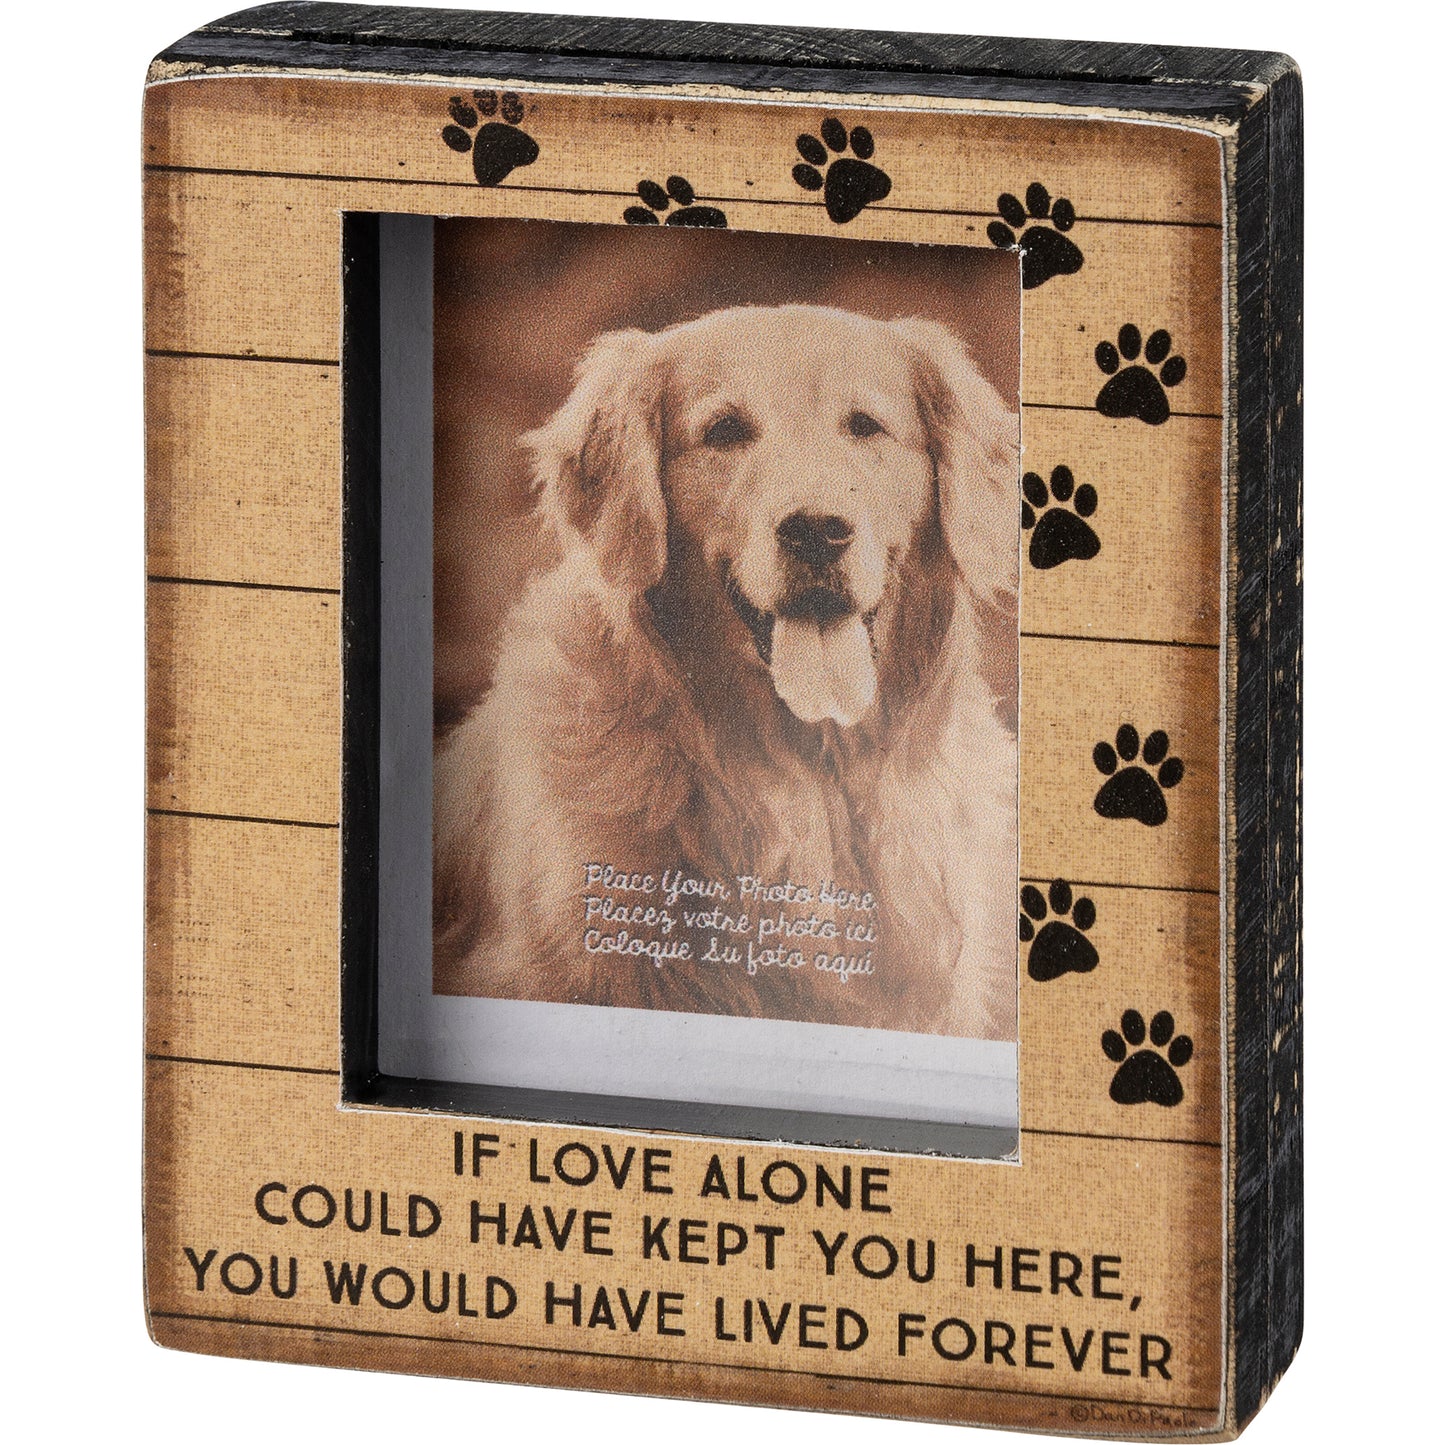 Pet Box Frame - 3.25" x 4" x 1" - You Would Have Lived Forever